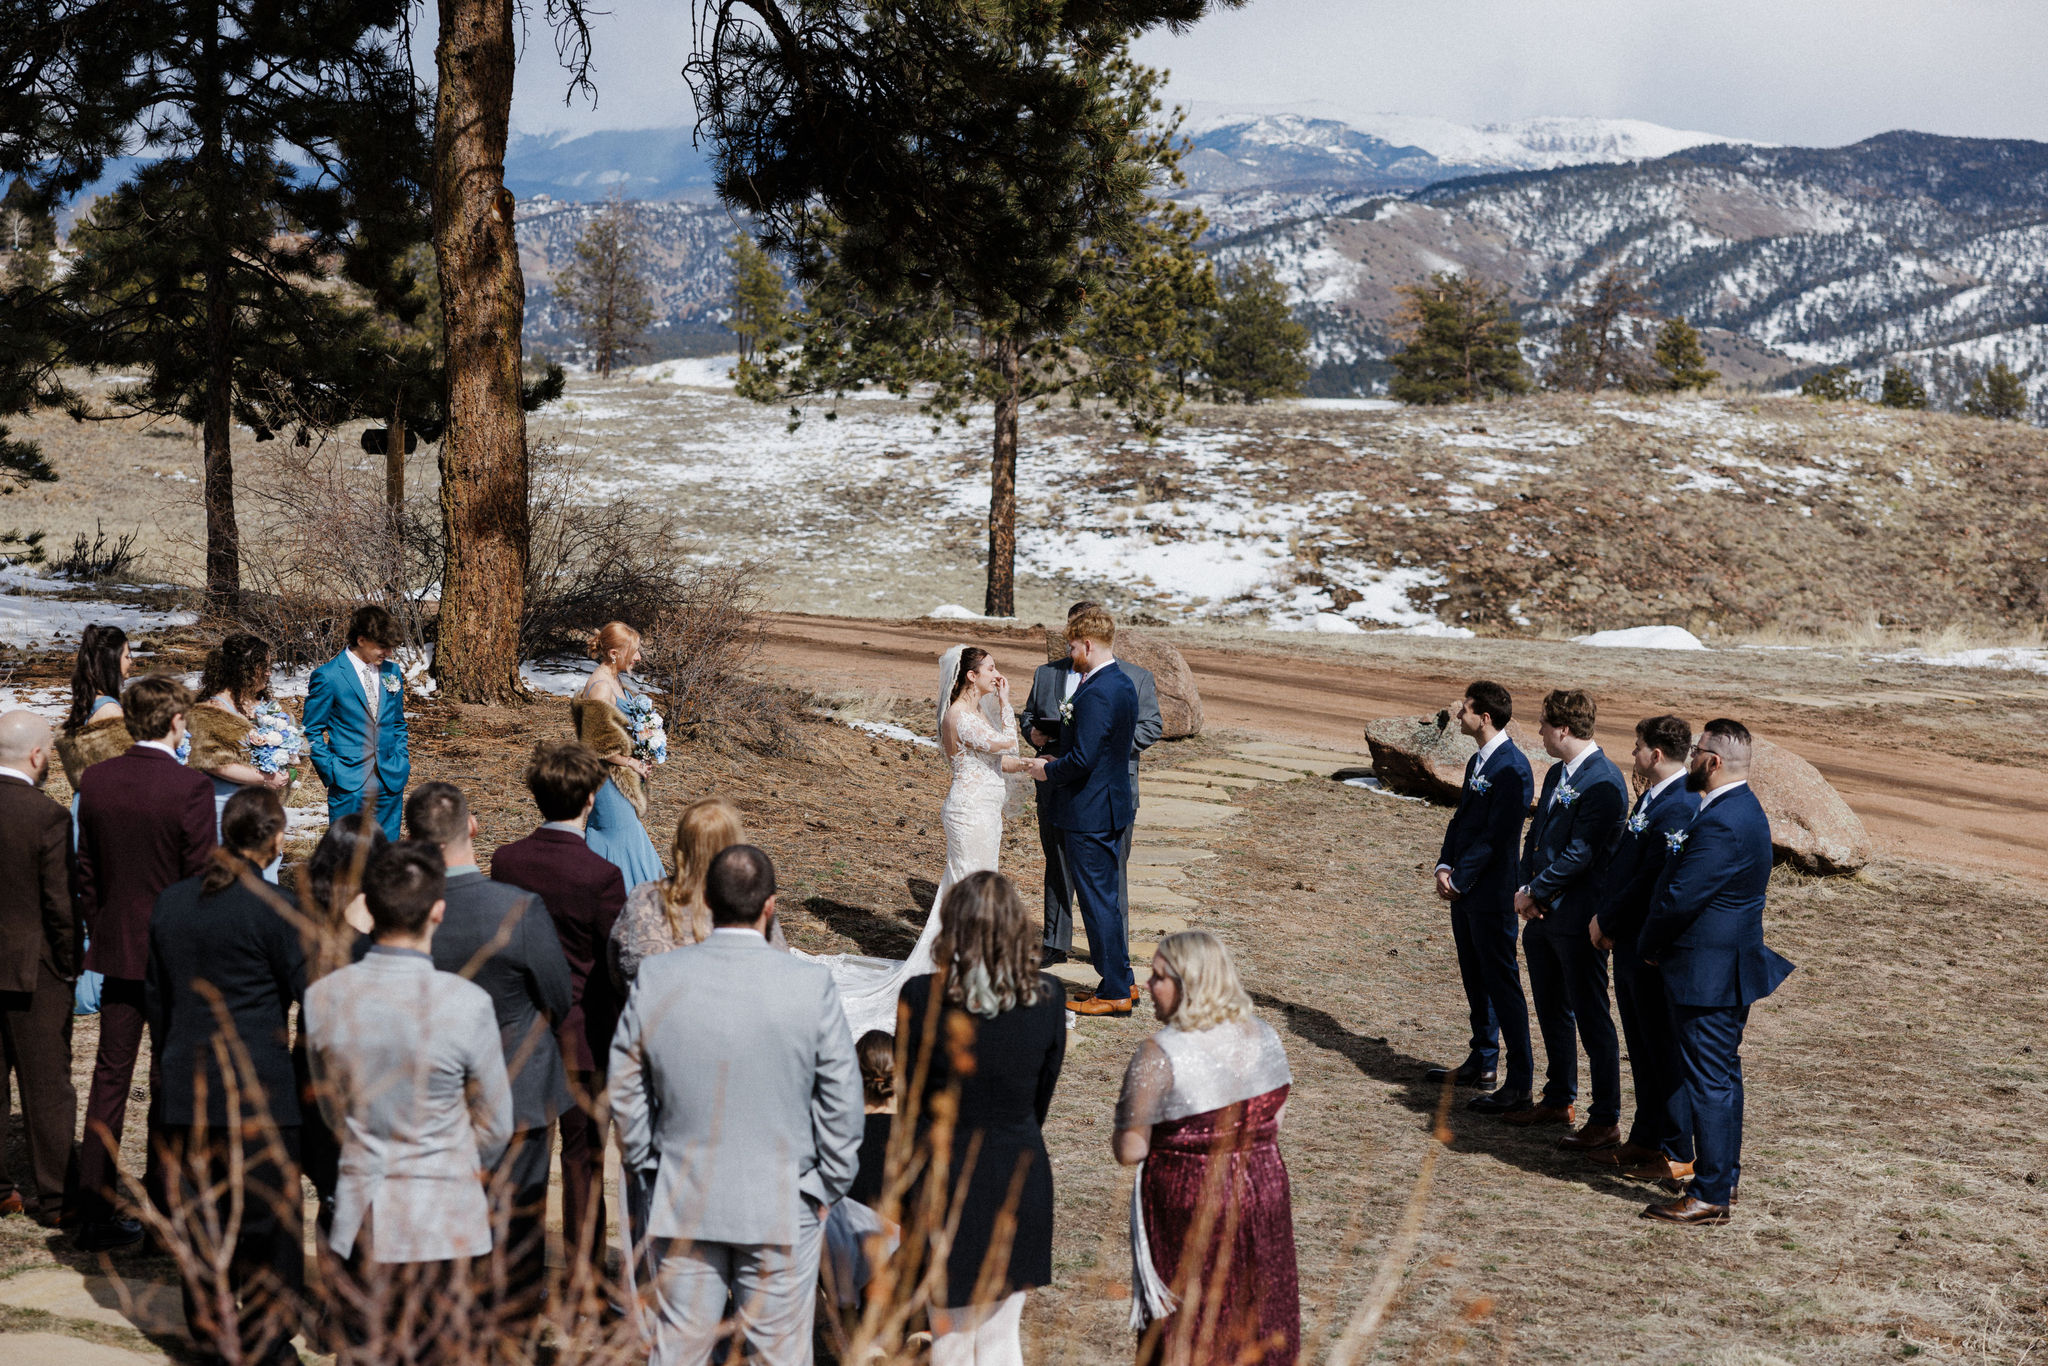 after narrowing down the wedding guest list, bride and groom hold micro wedding at colorado airbnb